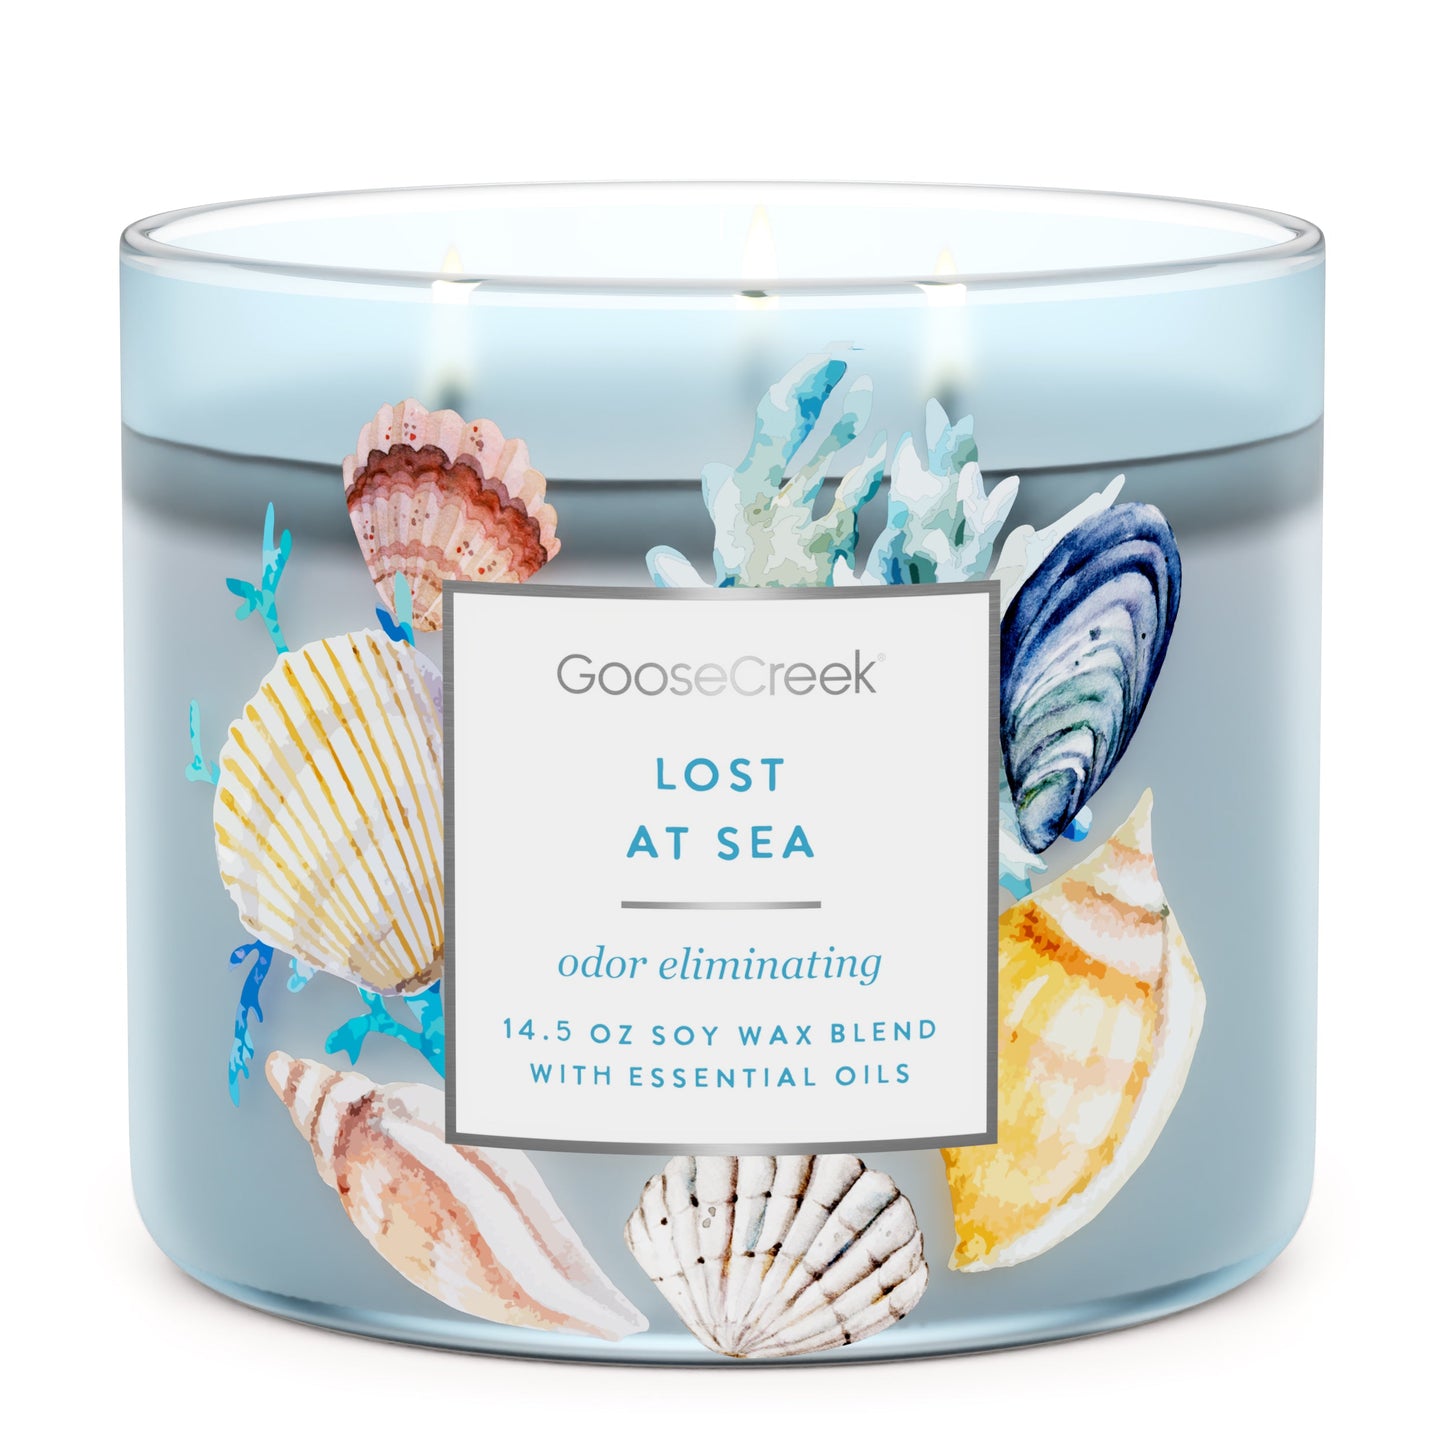 Odor Eliminating - Lost at Sea Large 3-Wick Candle